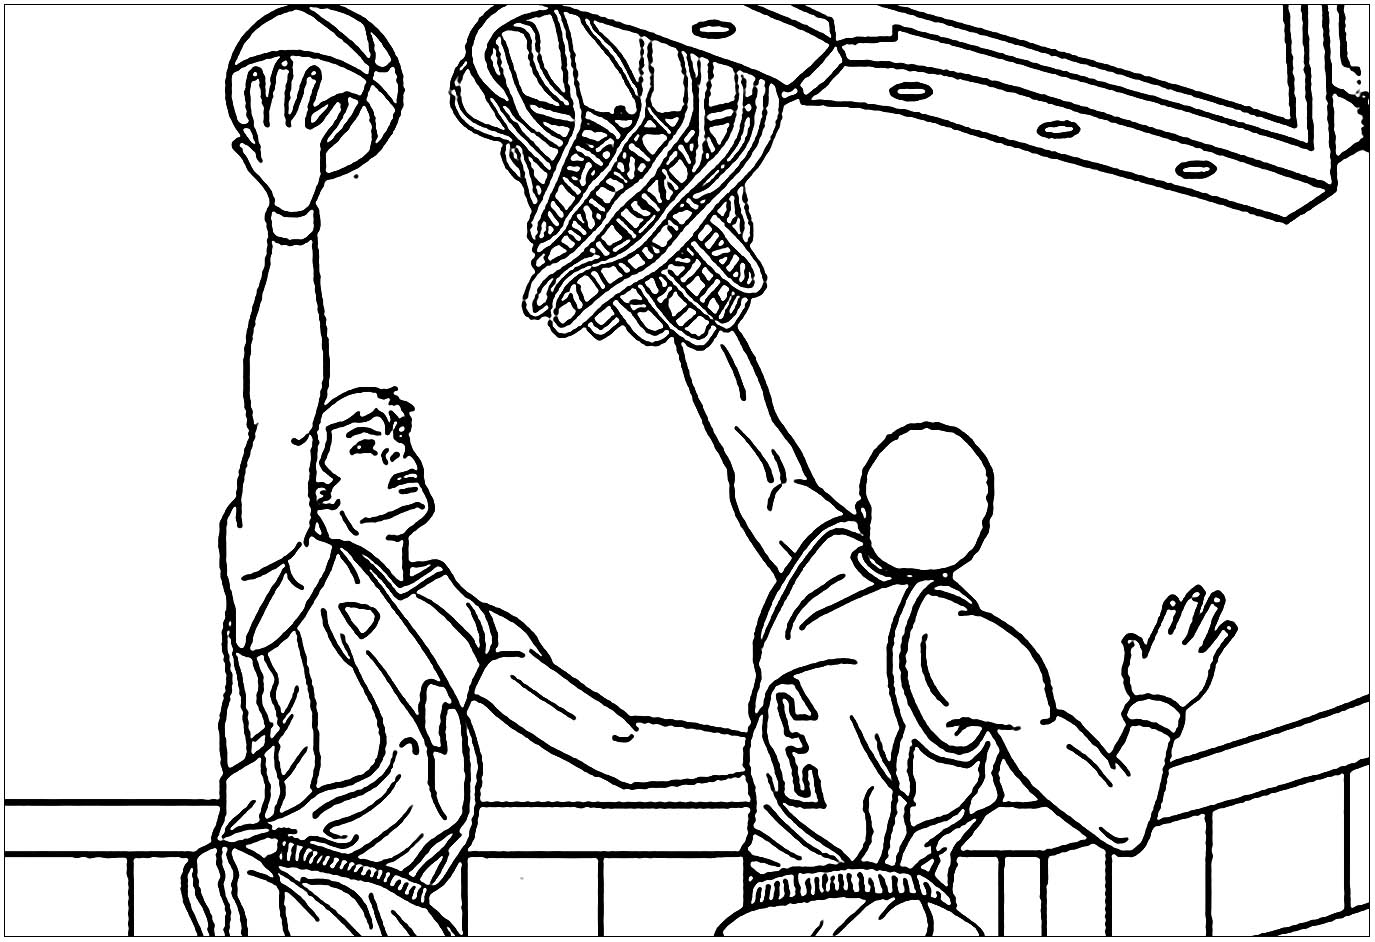 basketball player dunking coloring pages